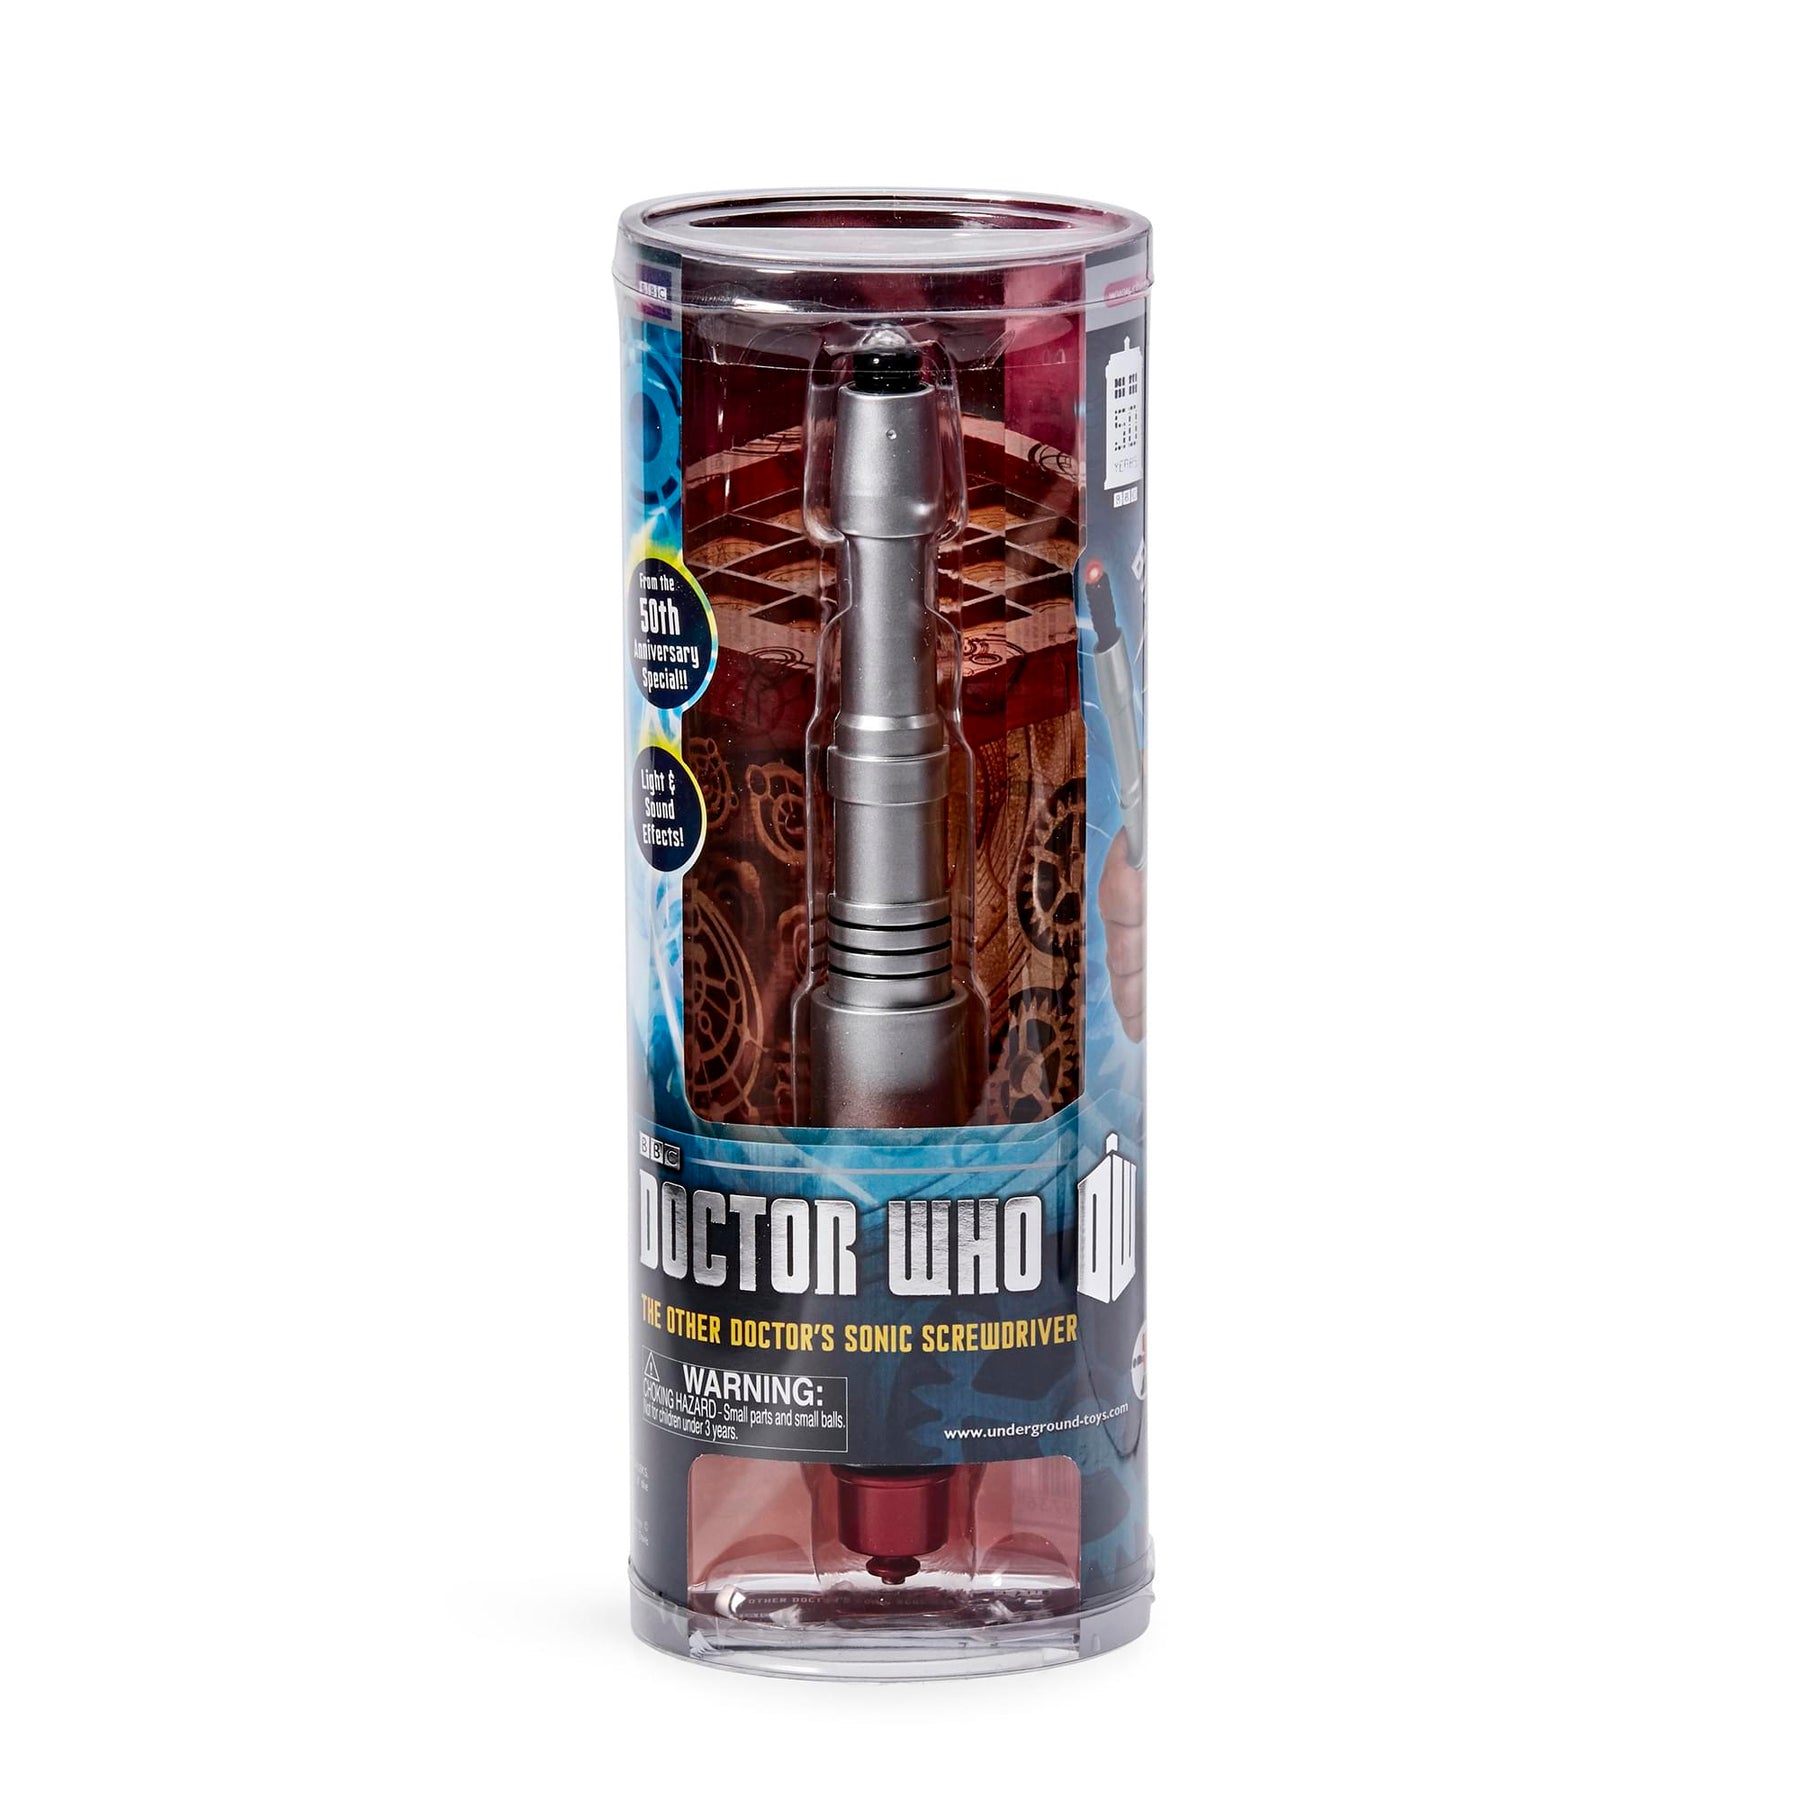 Doctor Who The Other Doctor's John Hurt Version Sonic Screwdriver